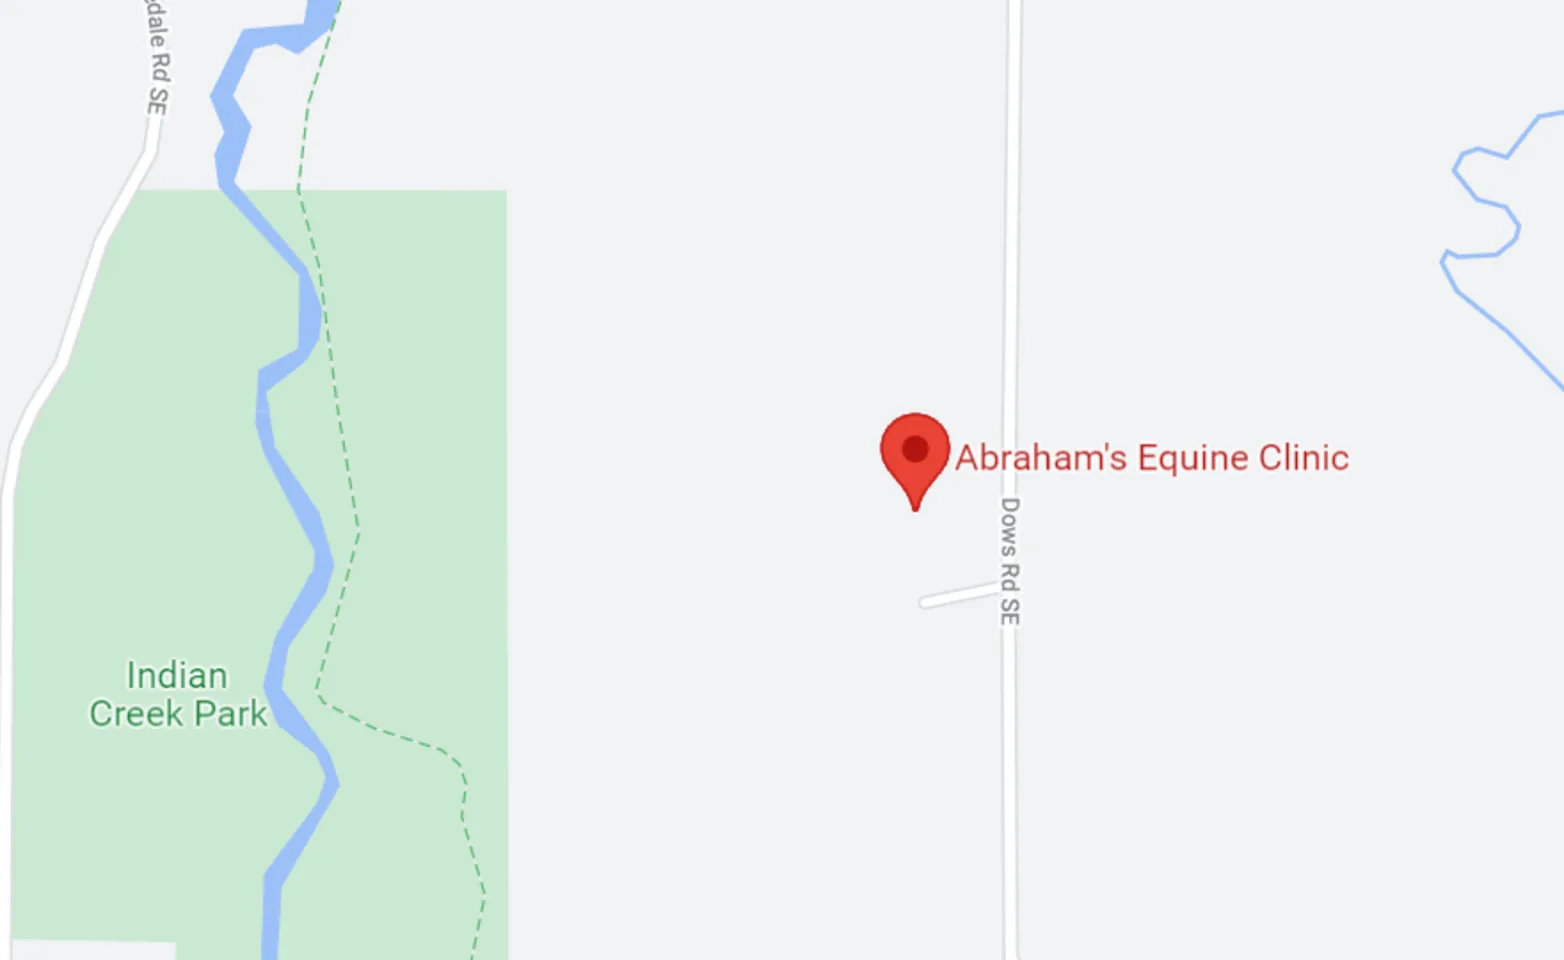 Abrahams' Equine Clinic 1276 - Map